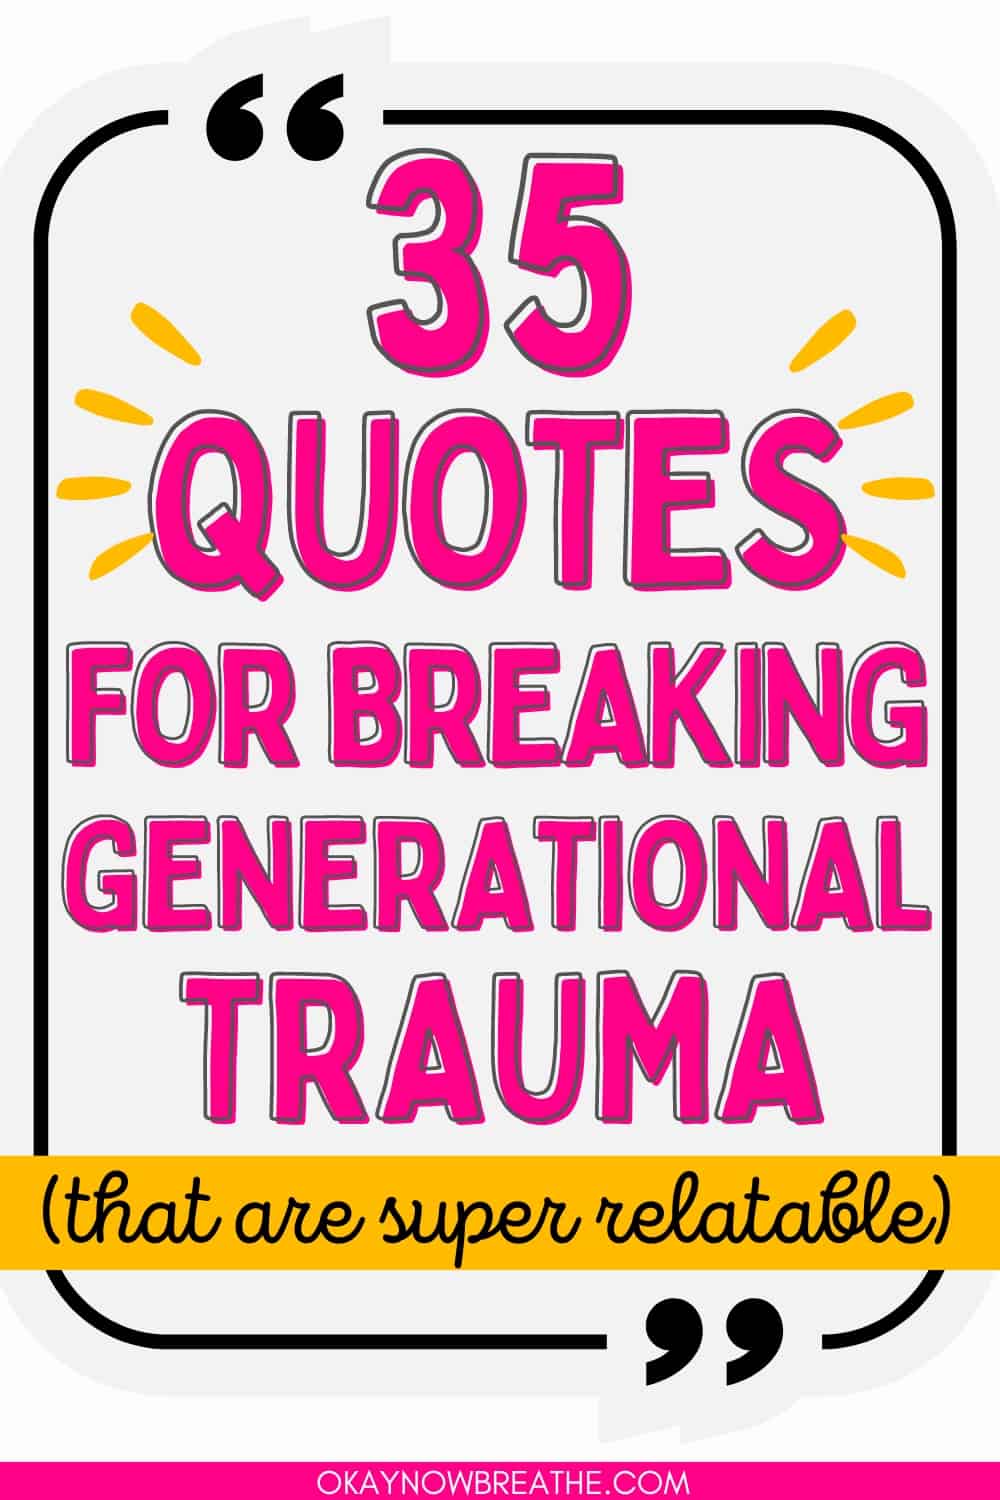 There is a quote box that says: 35 quotes for breaking generational trauma (that are super relatable) - okaynowbreathe.com